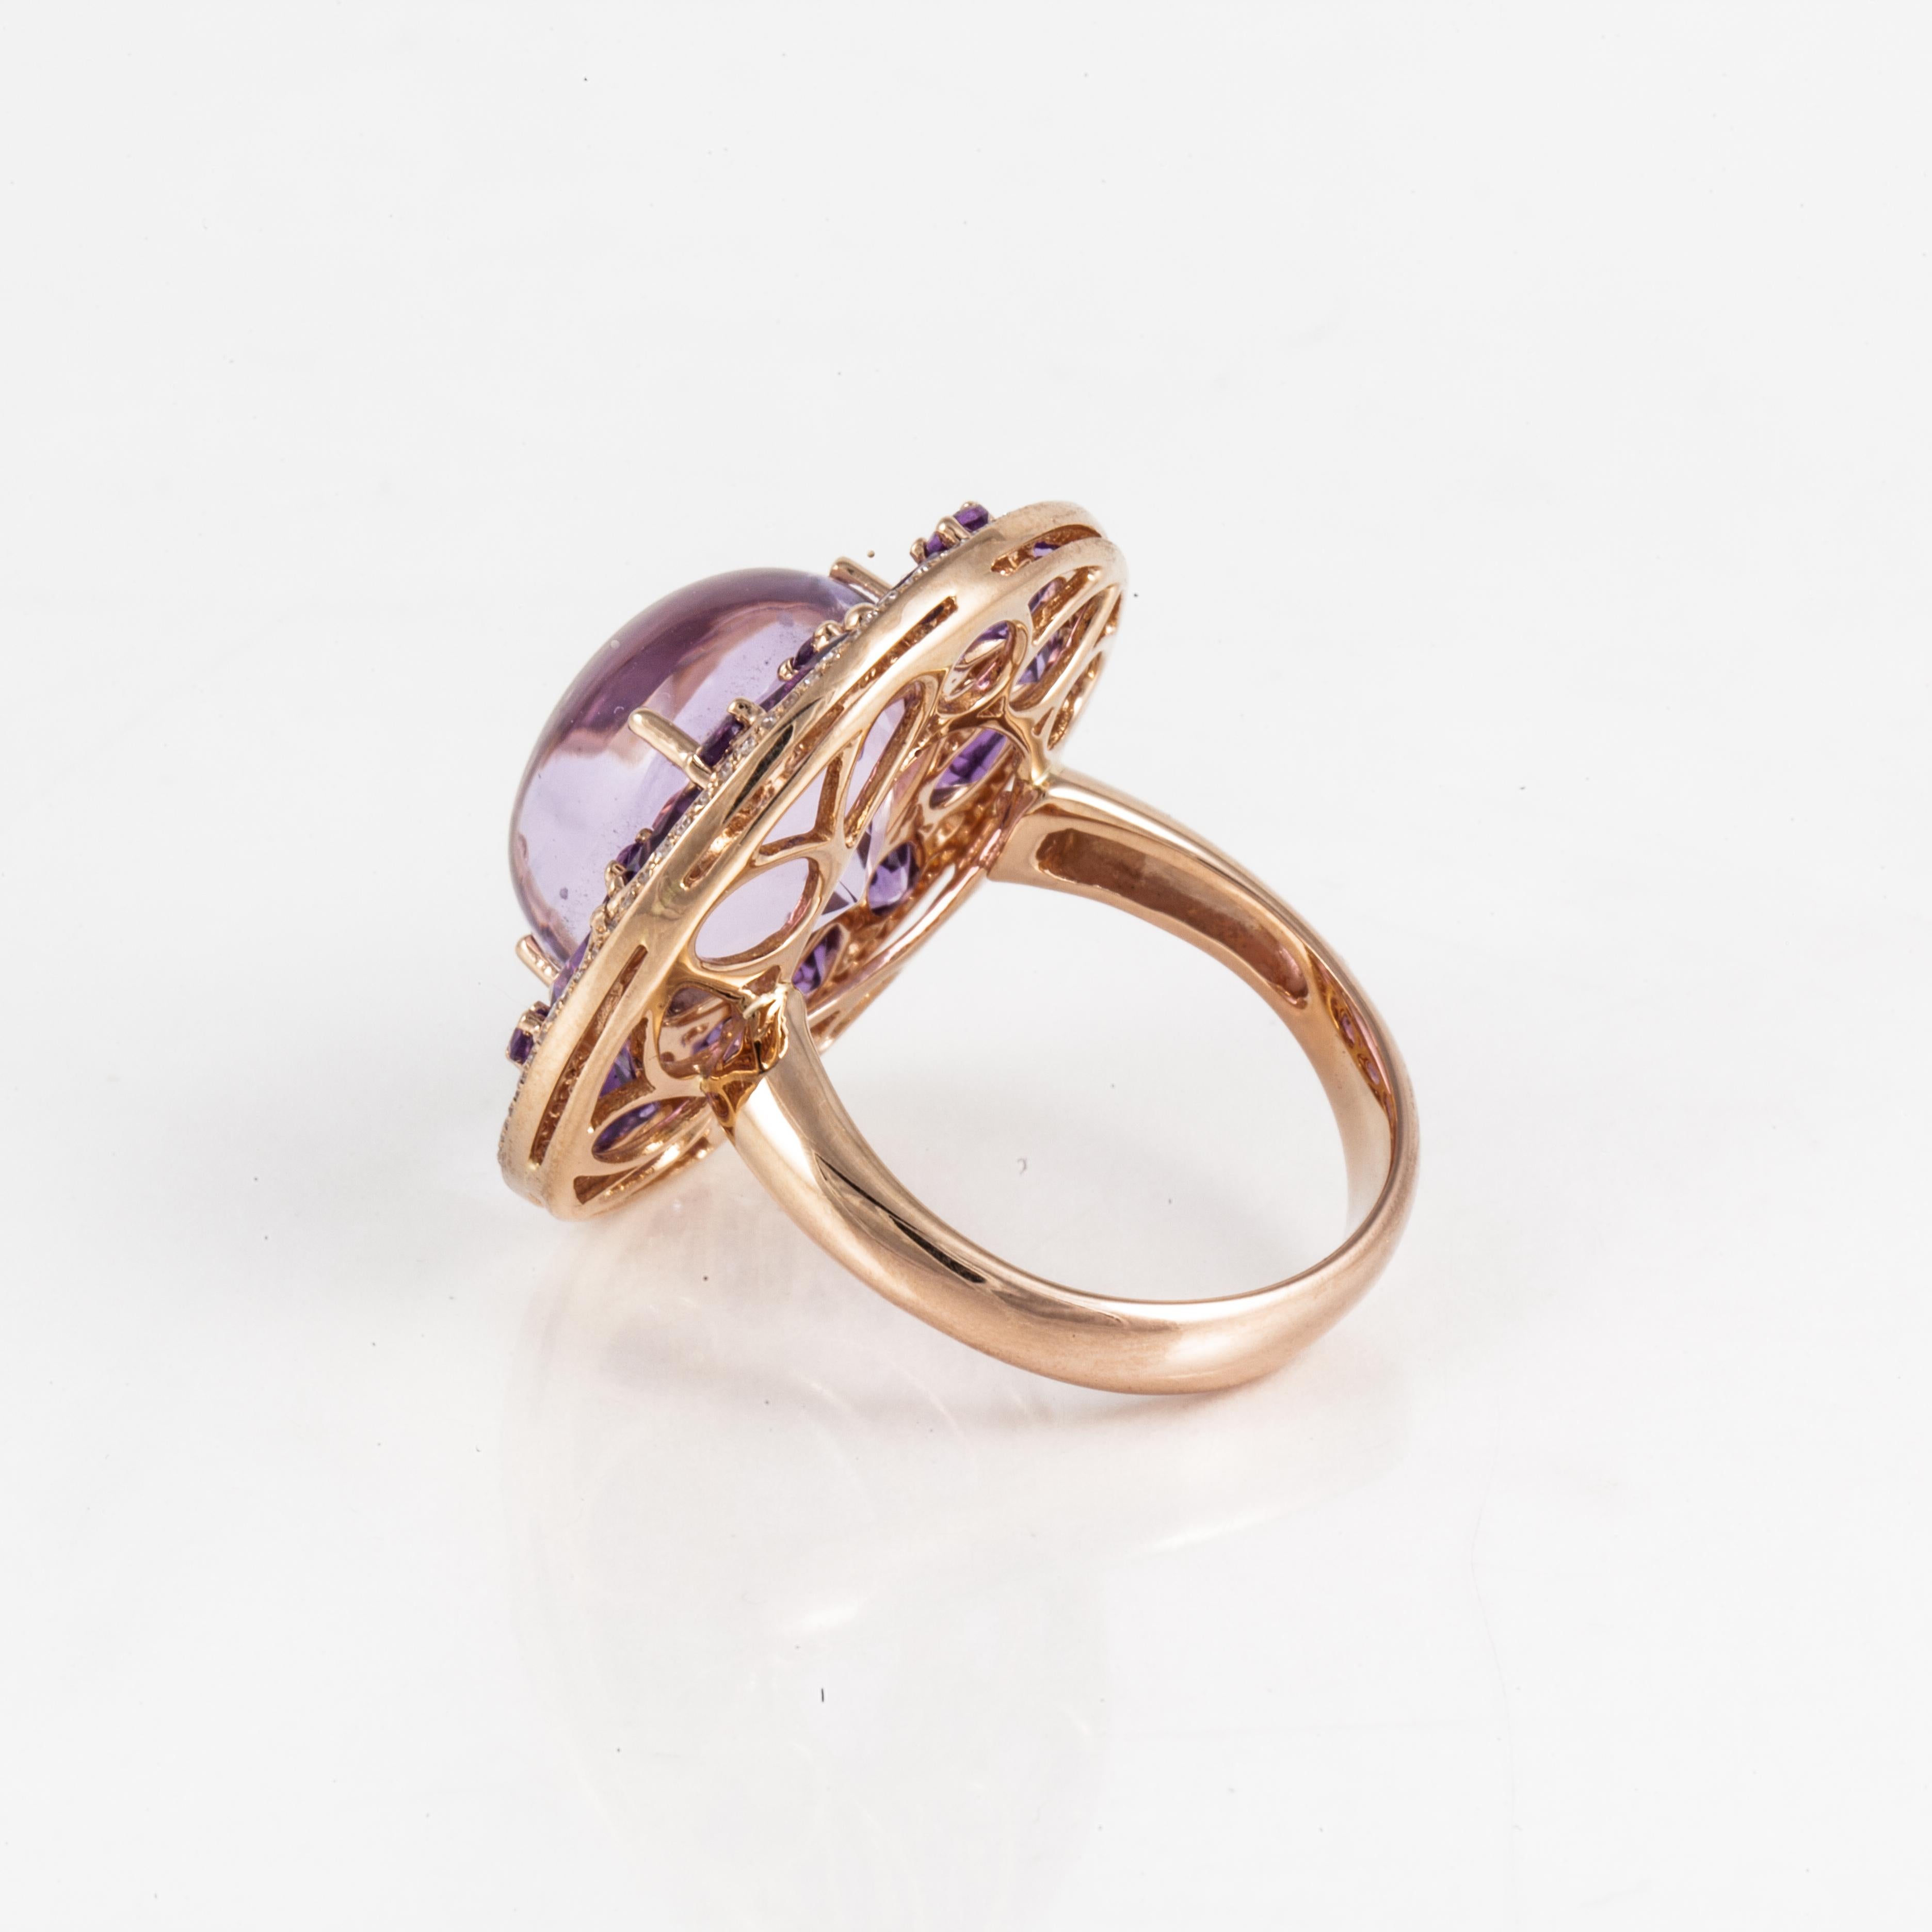 18K rose gold ring featuring a round cabochon amethyst framed by 22 faceted amethysts and then framed by 88 single-cut diamonds. The diamonds total 0.50 carats.  The ring measures 1 inch in diameter and sits 1/2 inch off the finger.